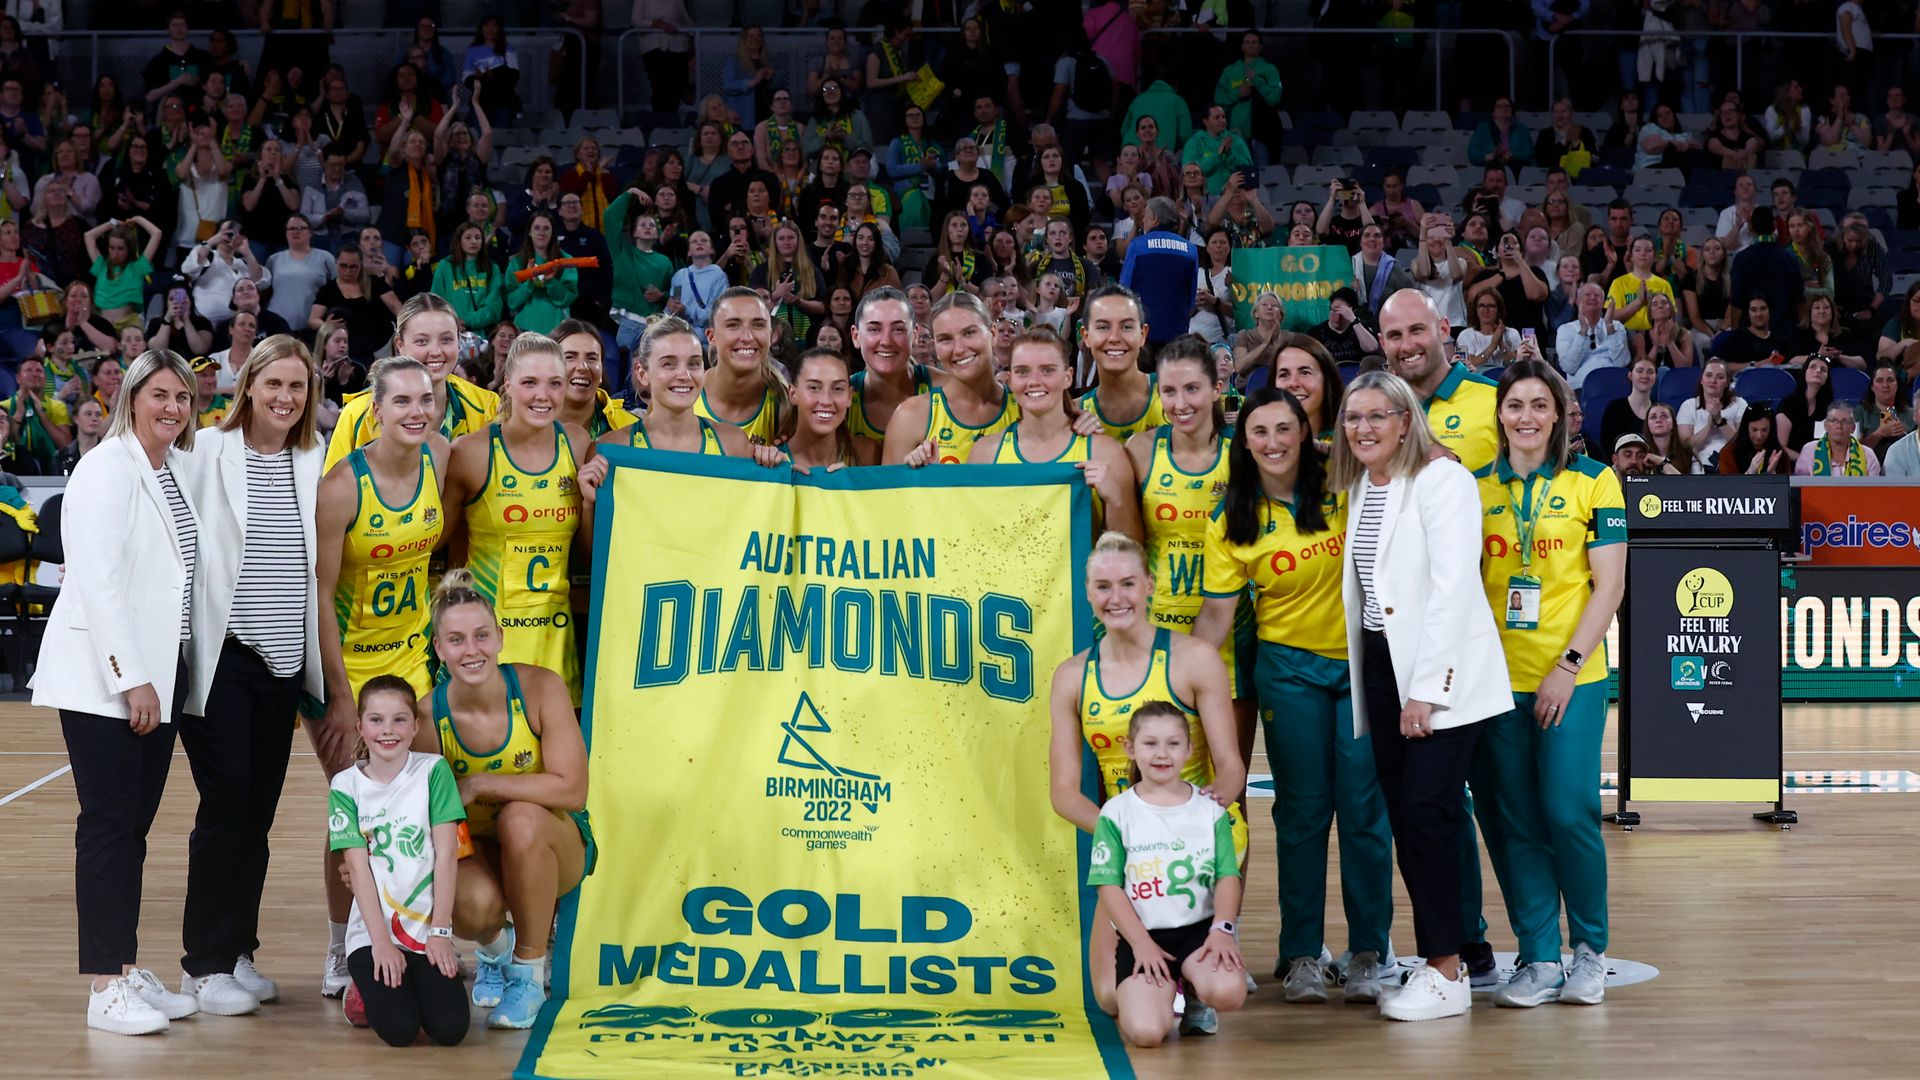 Netball Australia sponsorship deal pulled amid player concerns